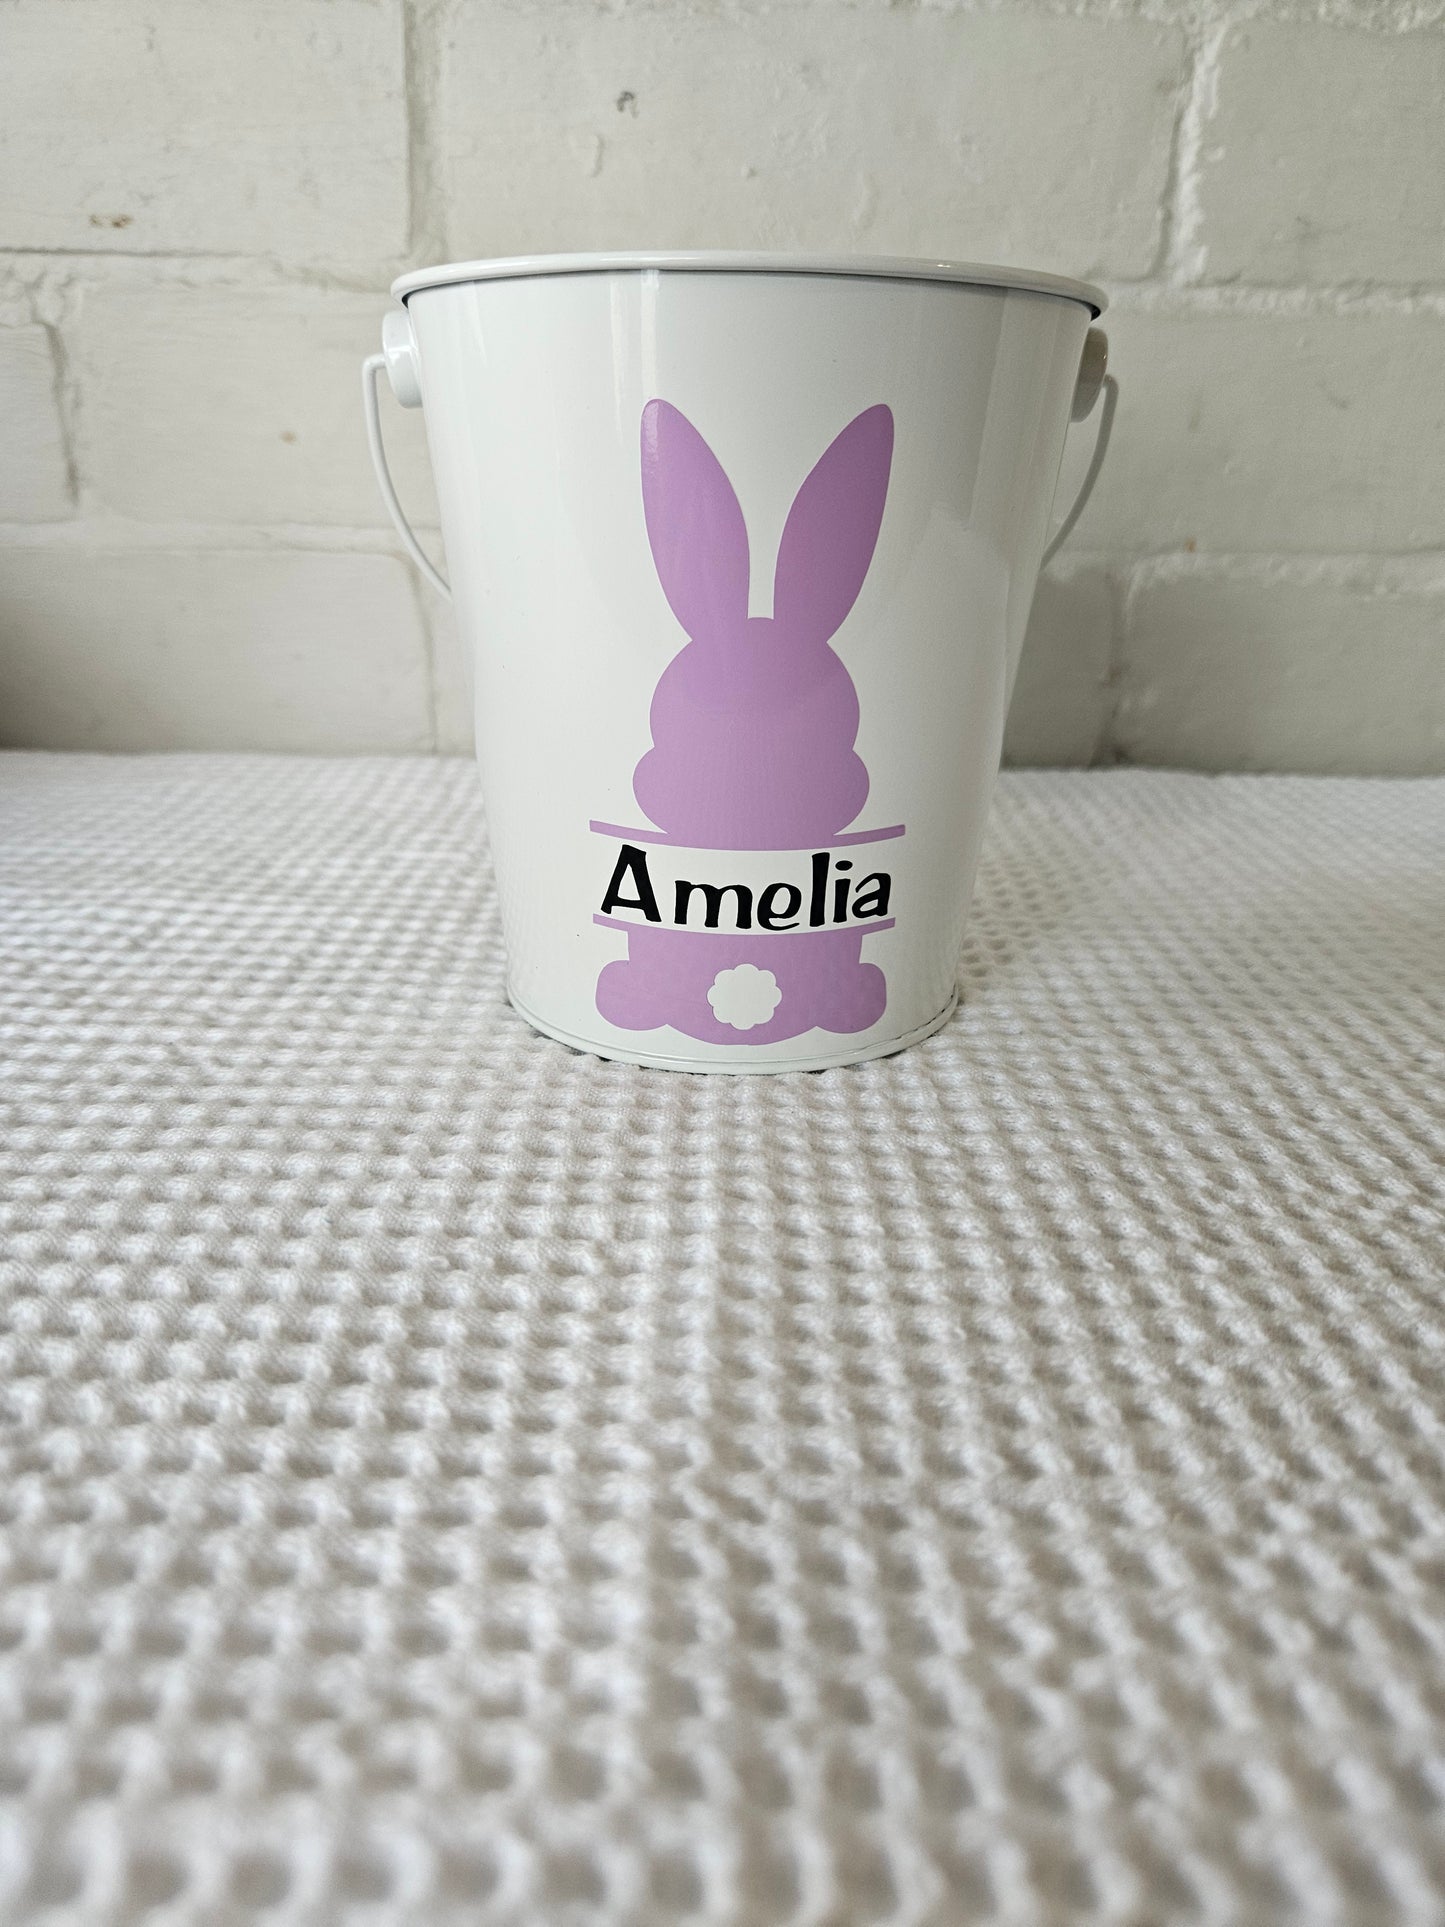 Personalised Easter buckets